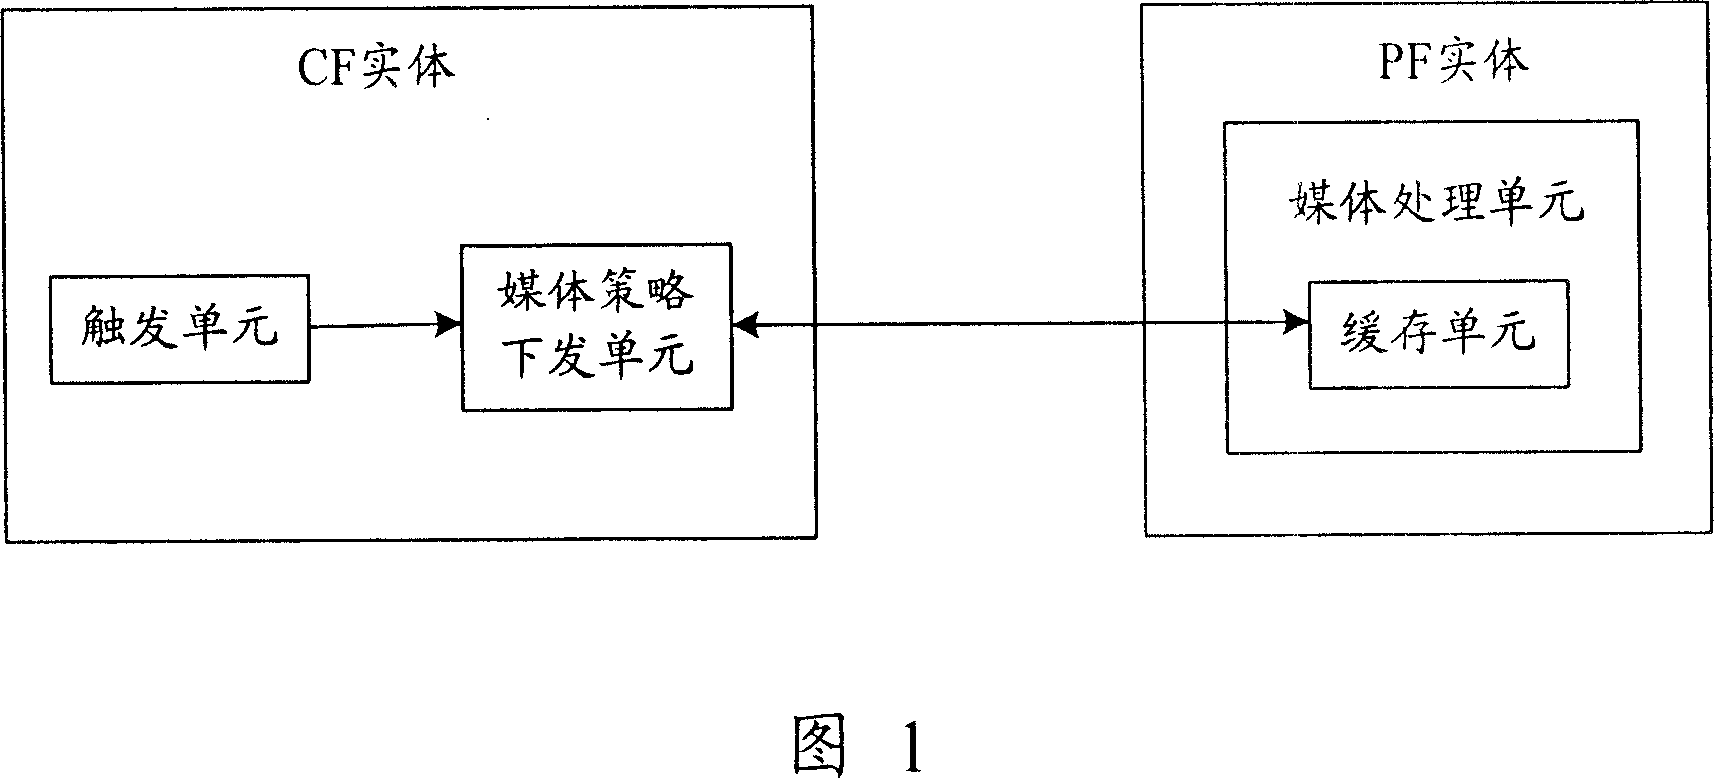 Method and system for implementing service of multiparty communication